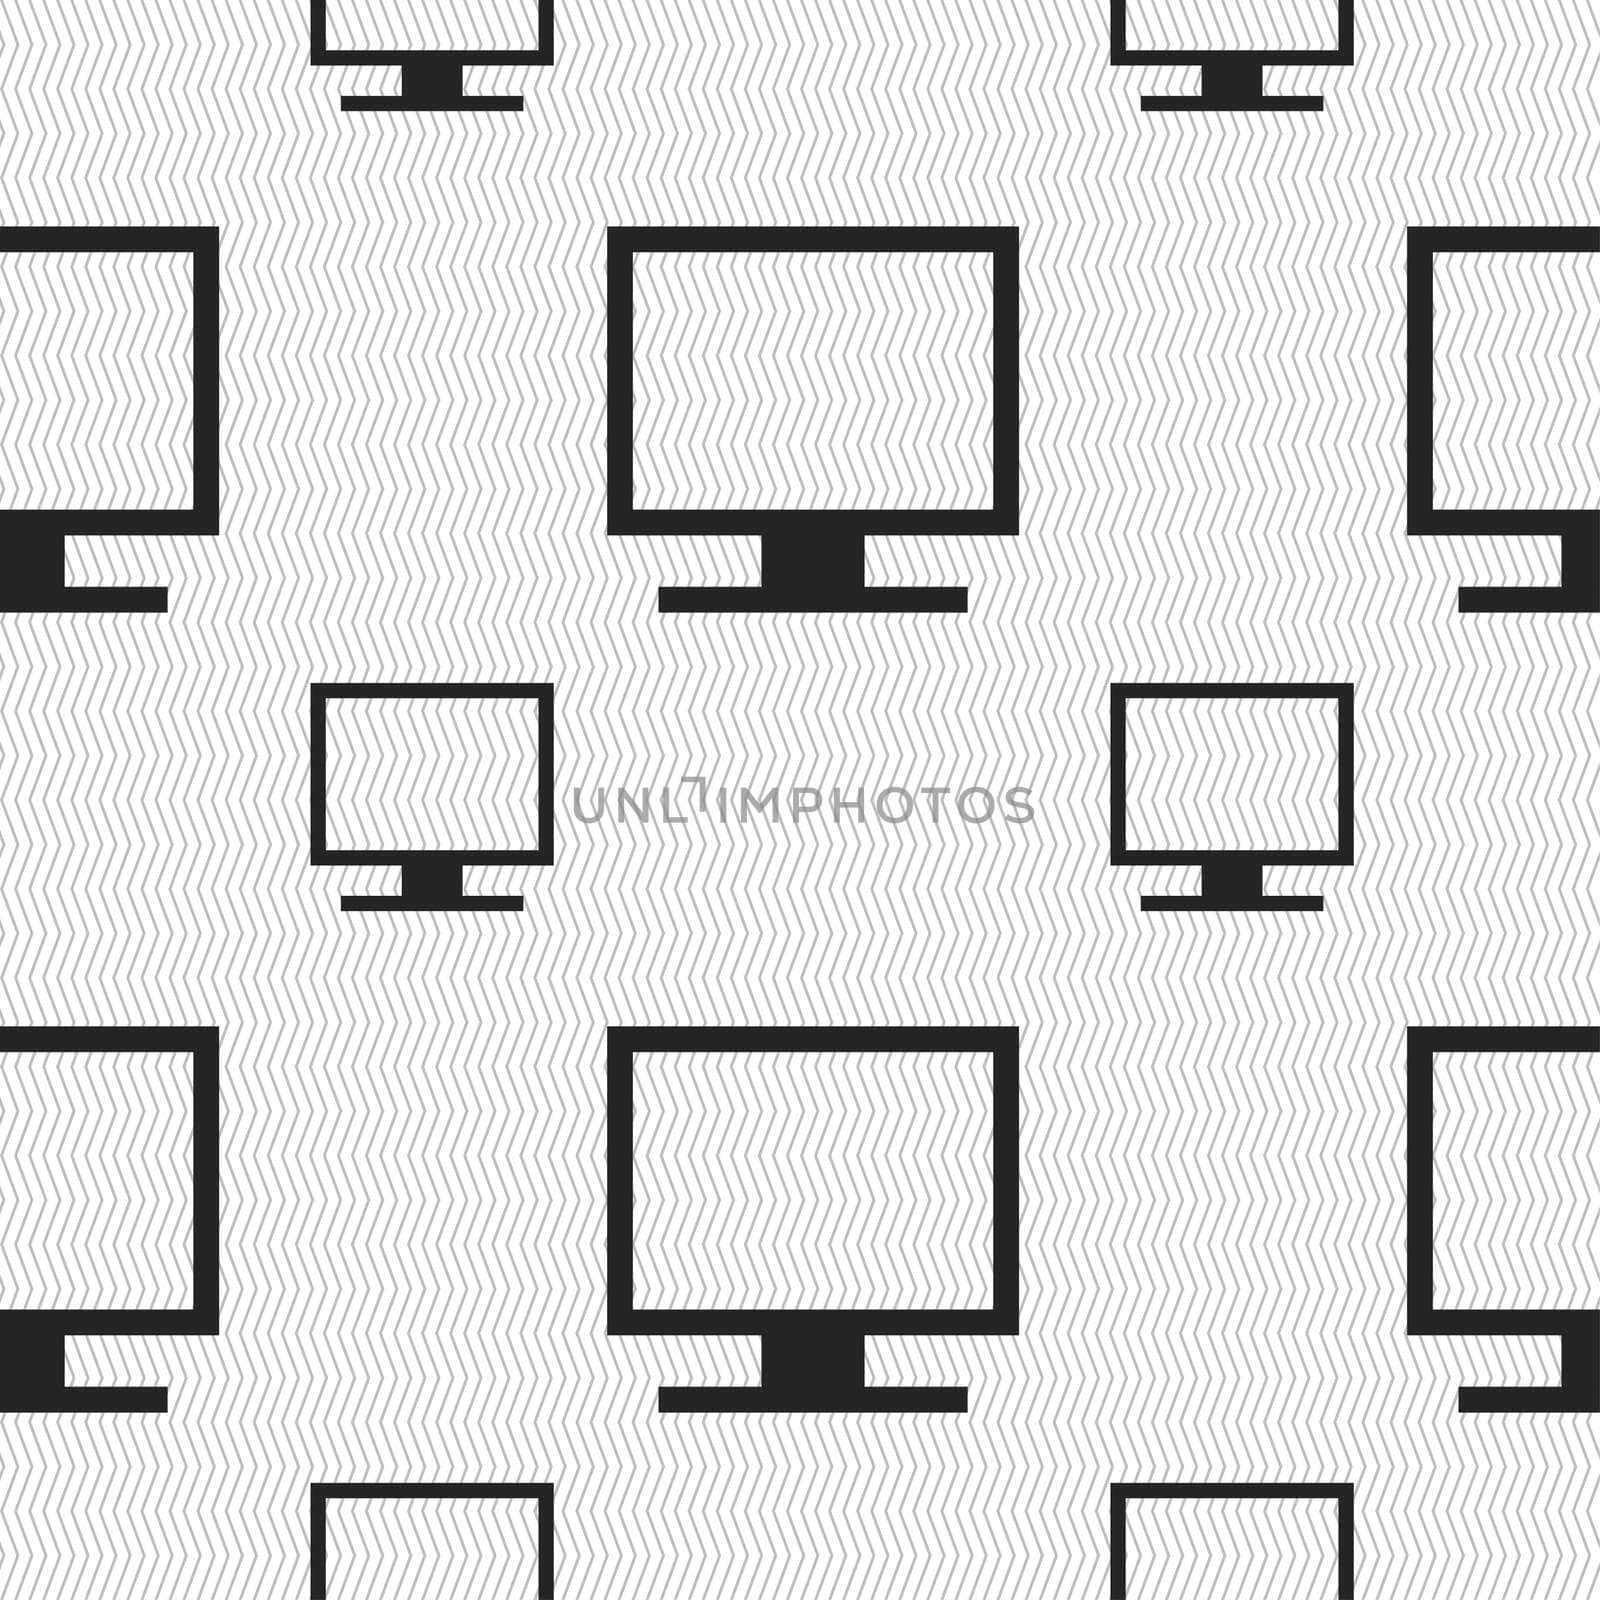 Computer widescreen monitor icon sign. Seamless pattern with geometric texture. illustration